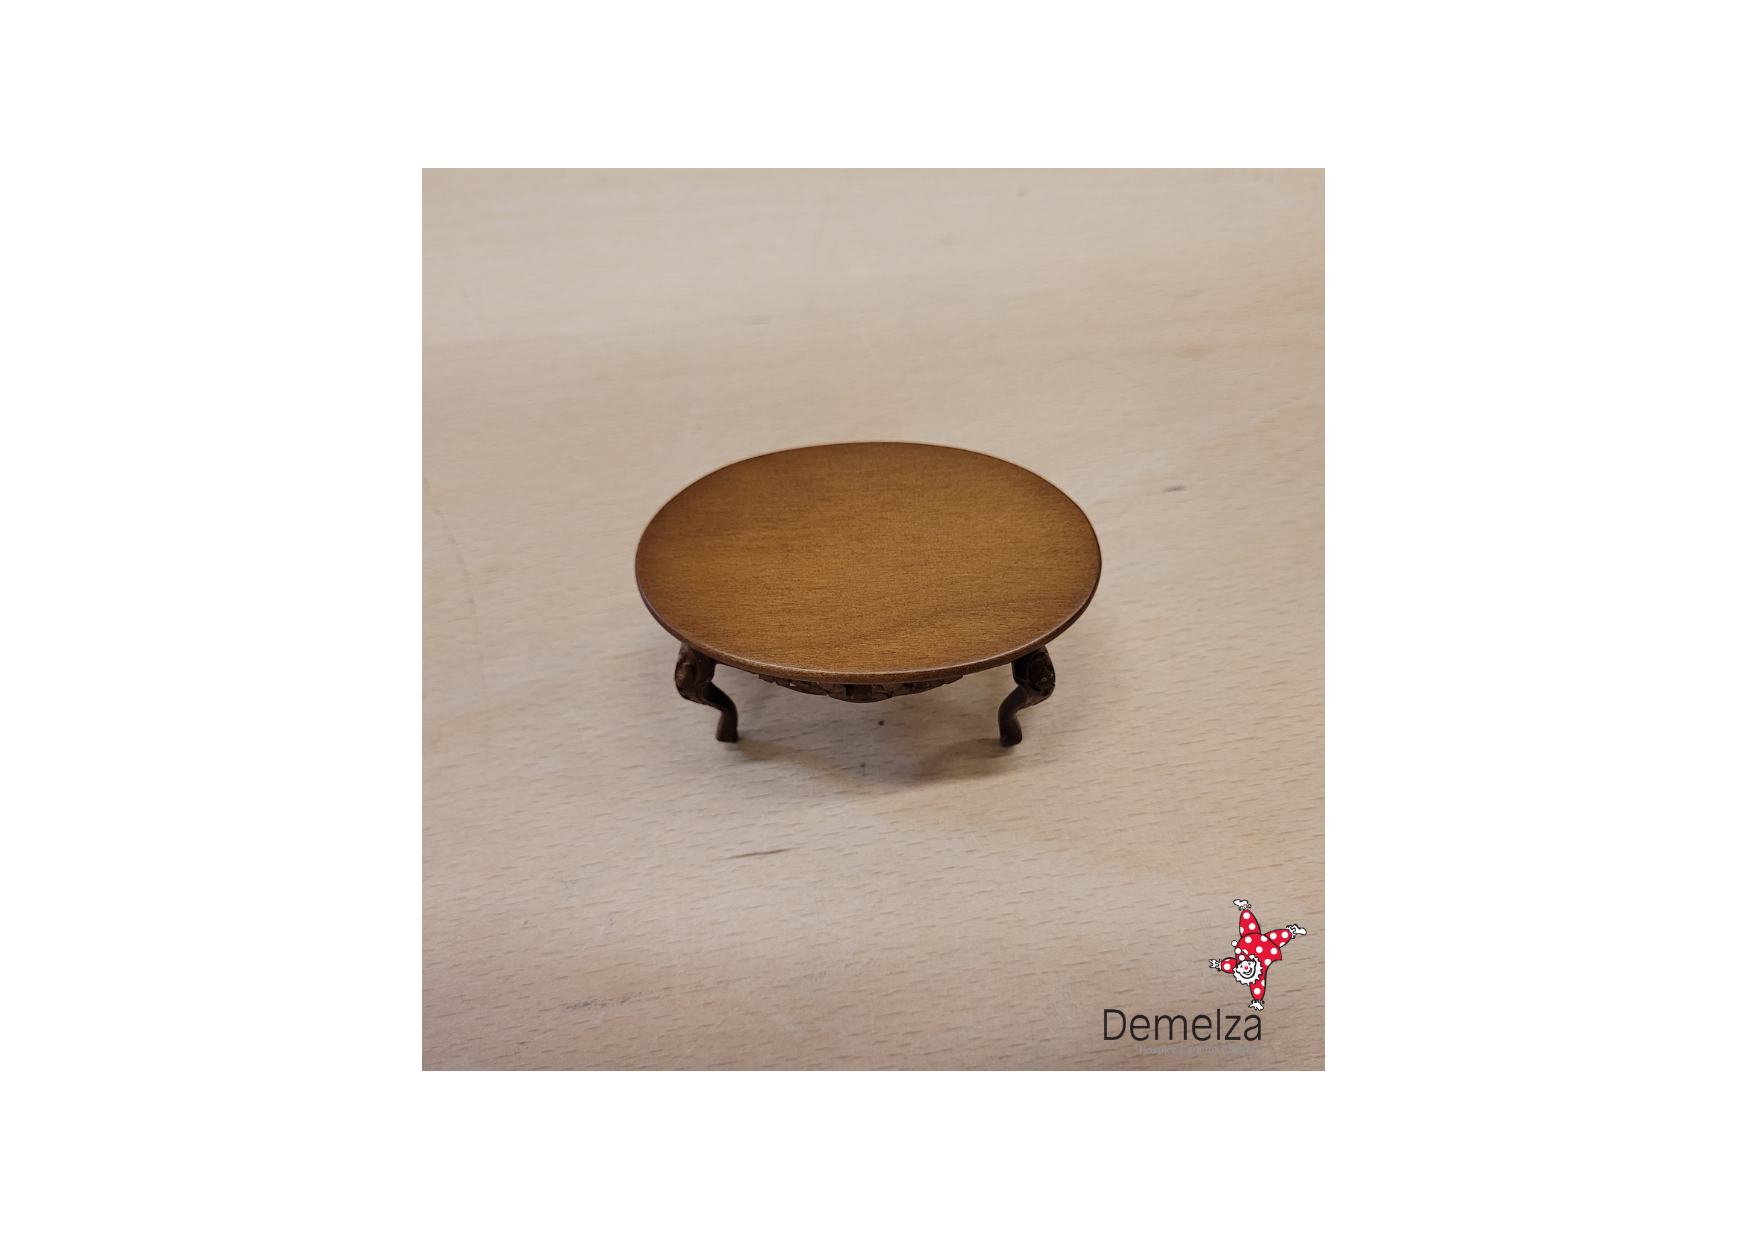 Dolls House 1:12 Scale Walnut Coffee Table Top View